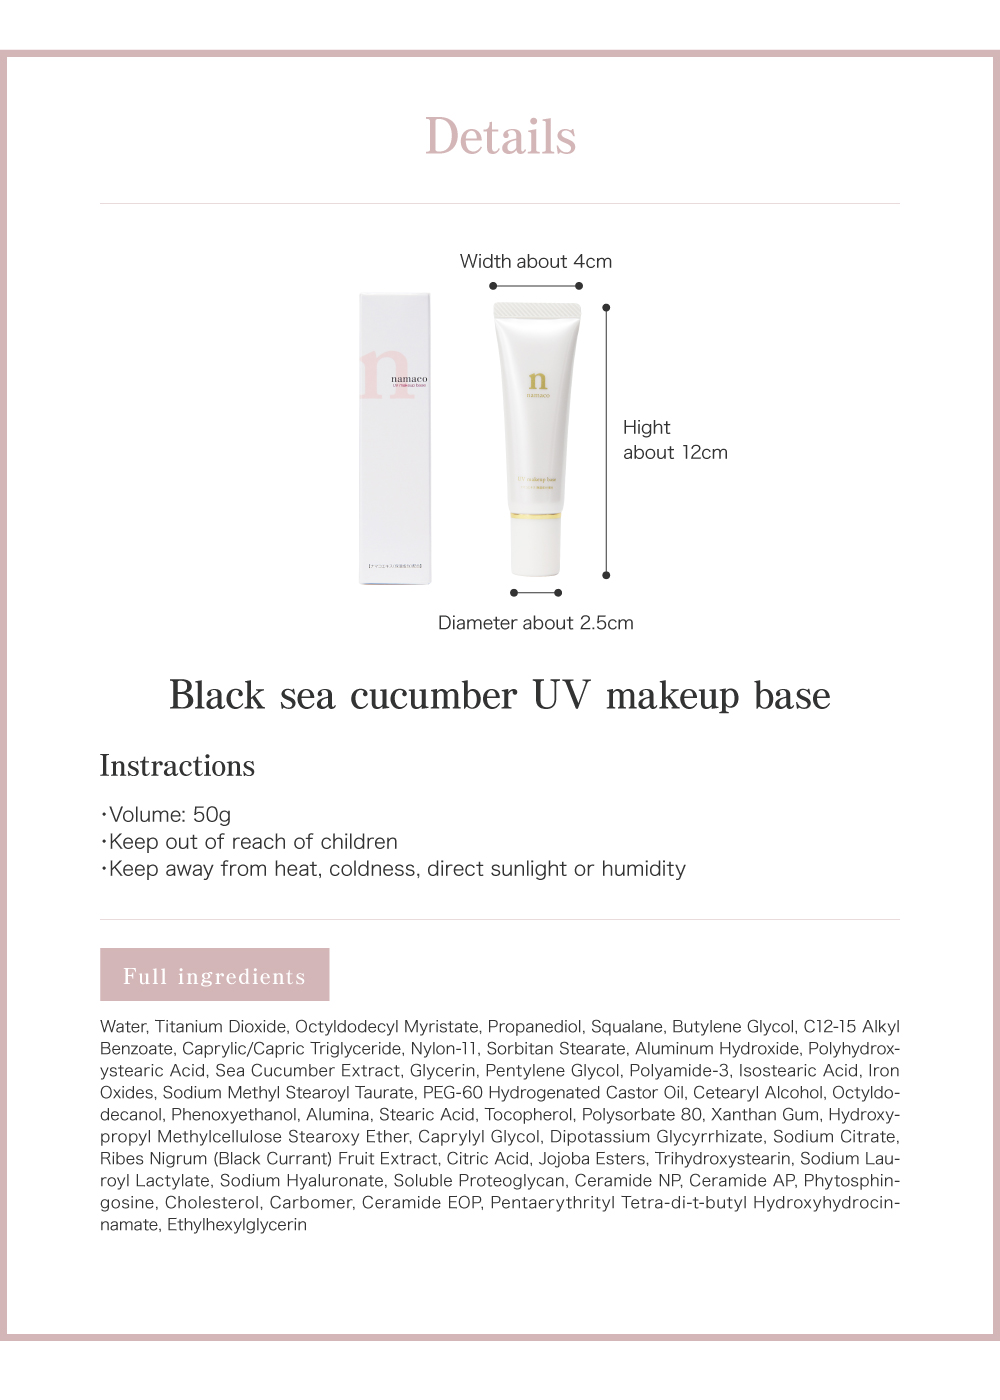 The dimensions of the black sea cucumber UV makeup base 50g is Hight about 12cm, Diameter about 2.5cm